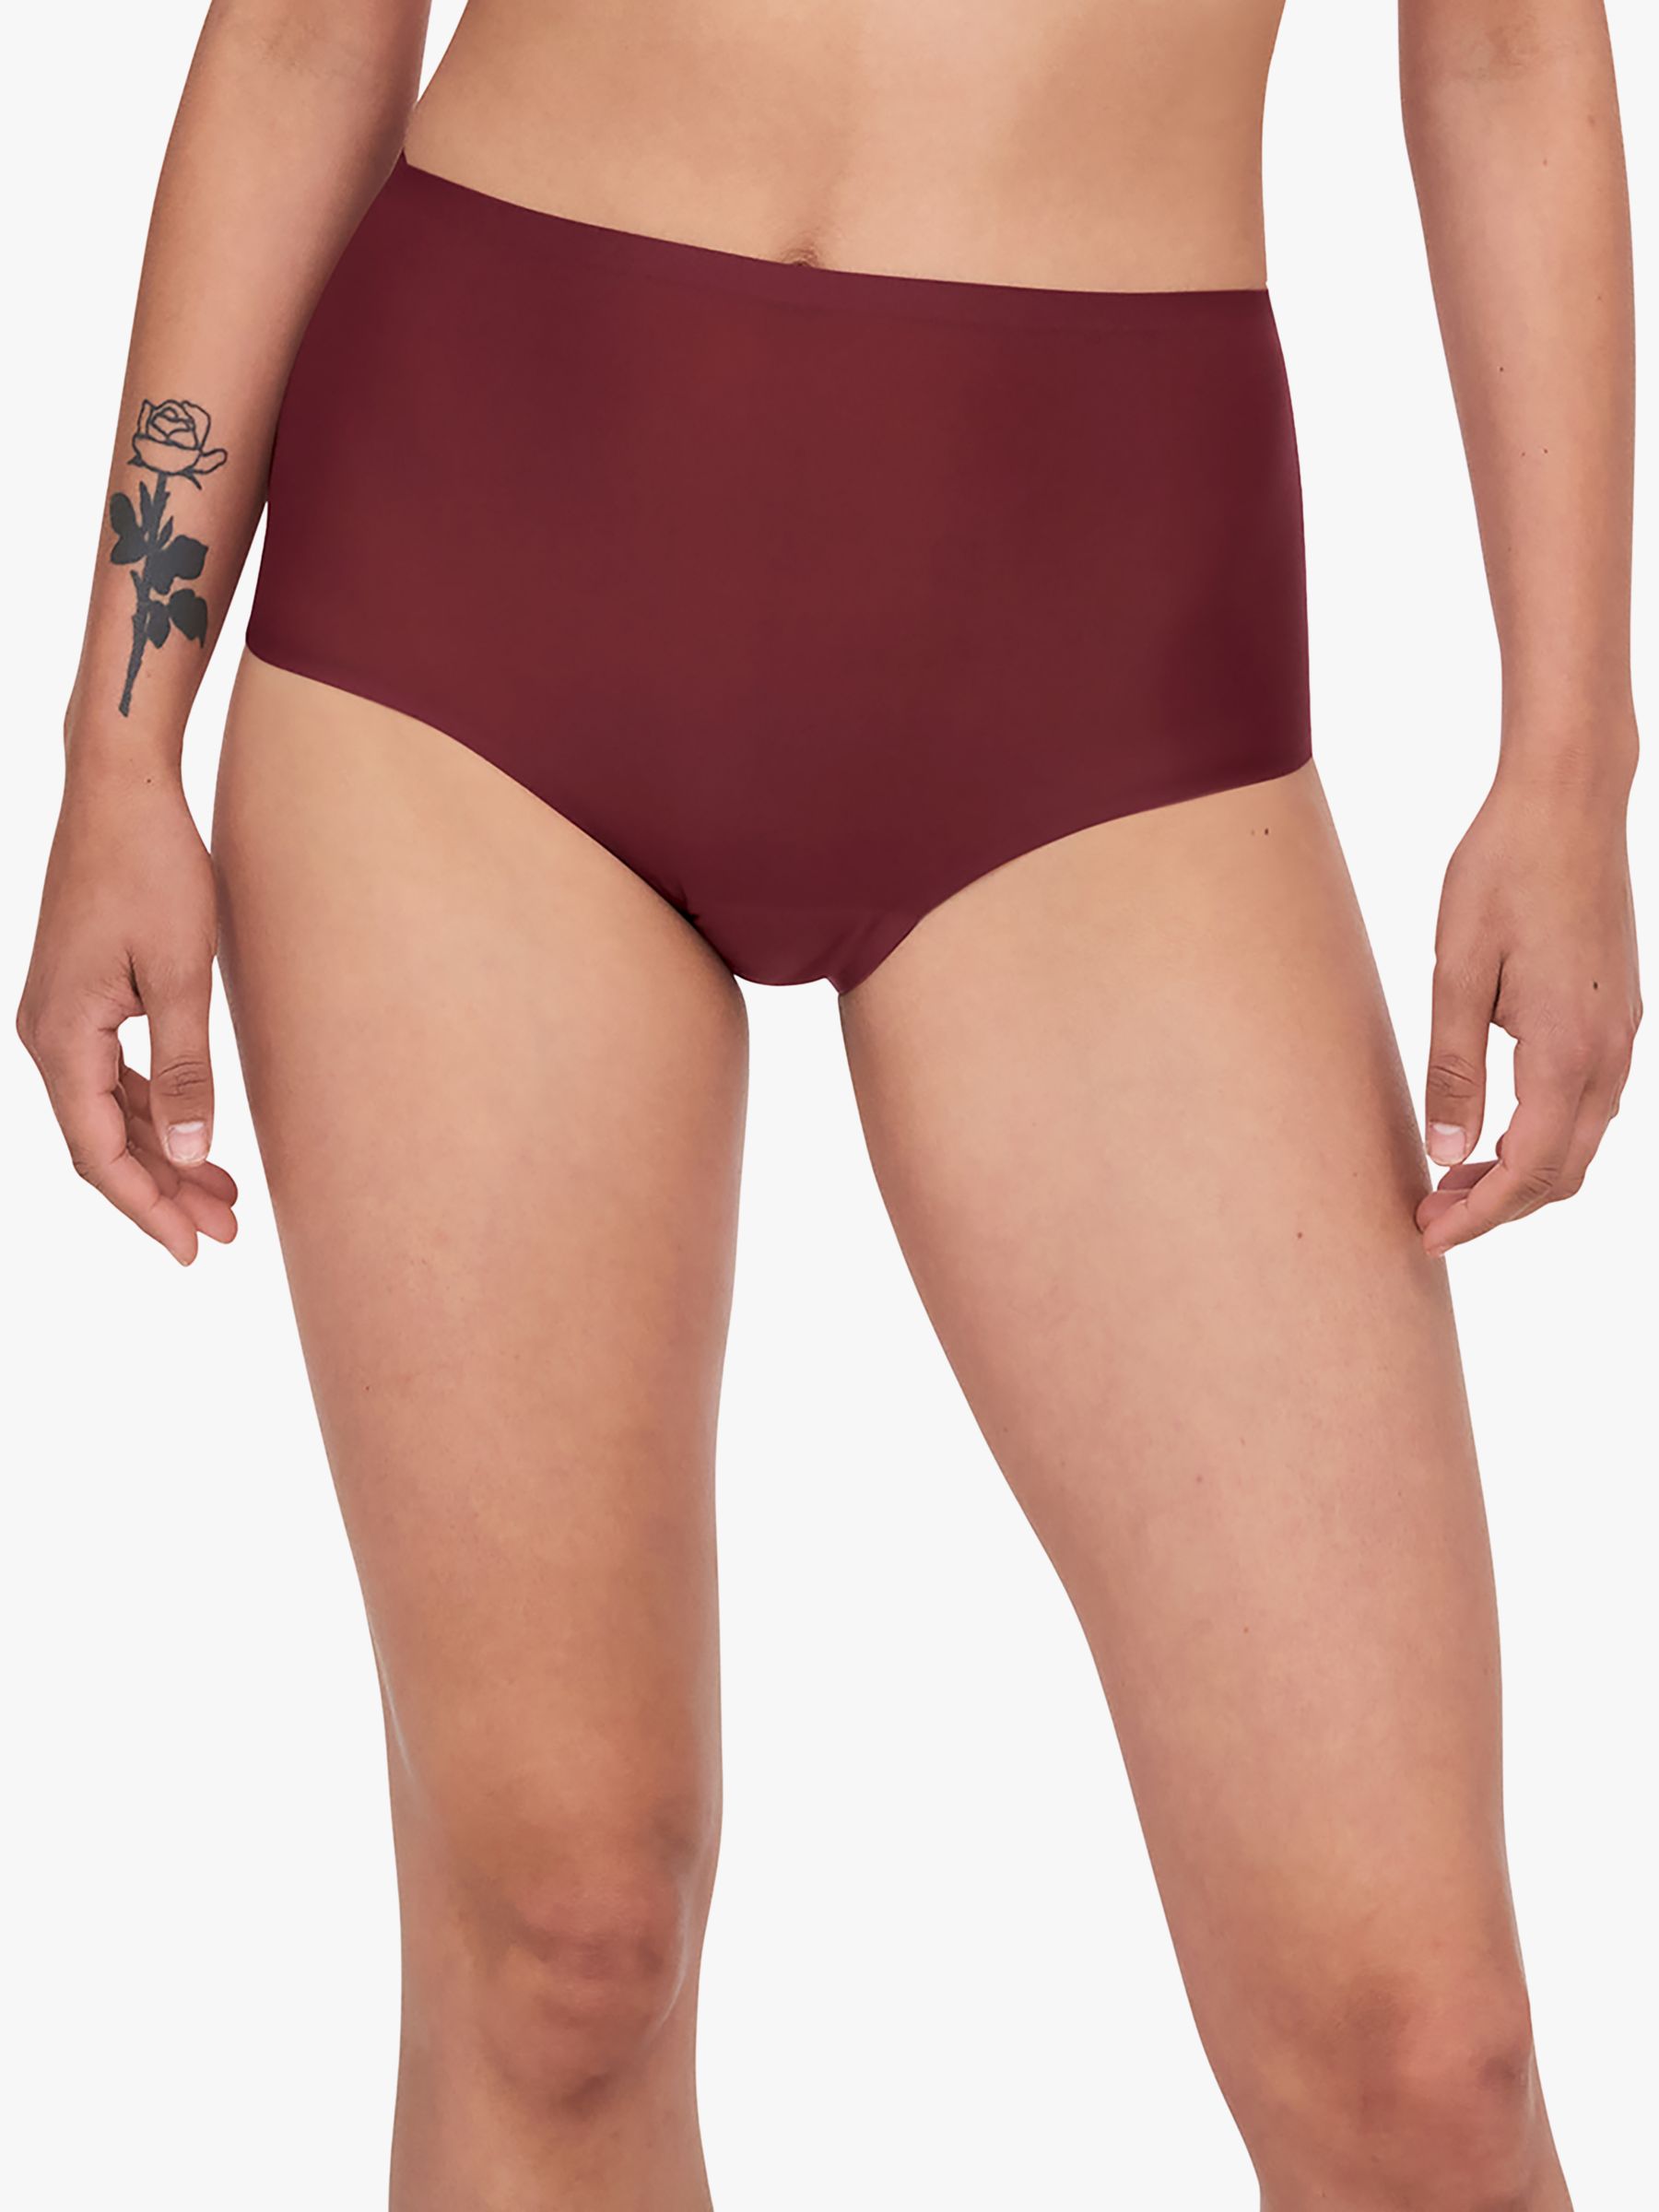 Chantelle Soft Stretch High Waisted Knickers, Mahogany, One Size